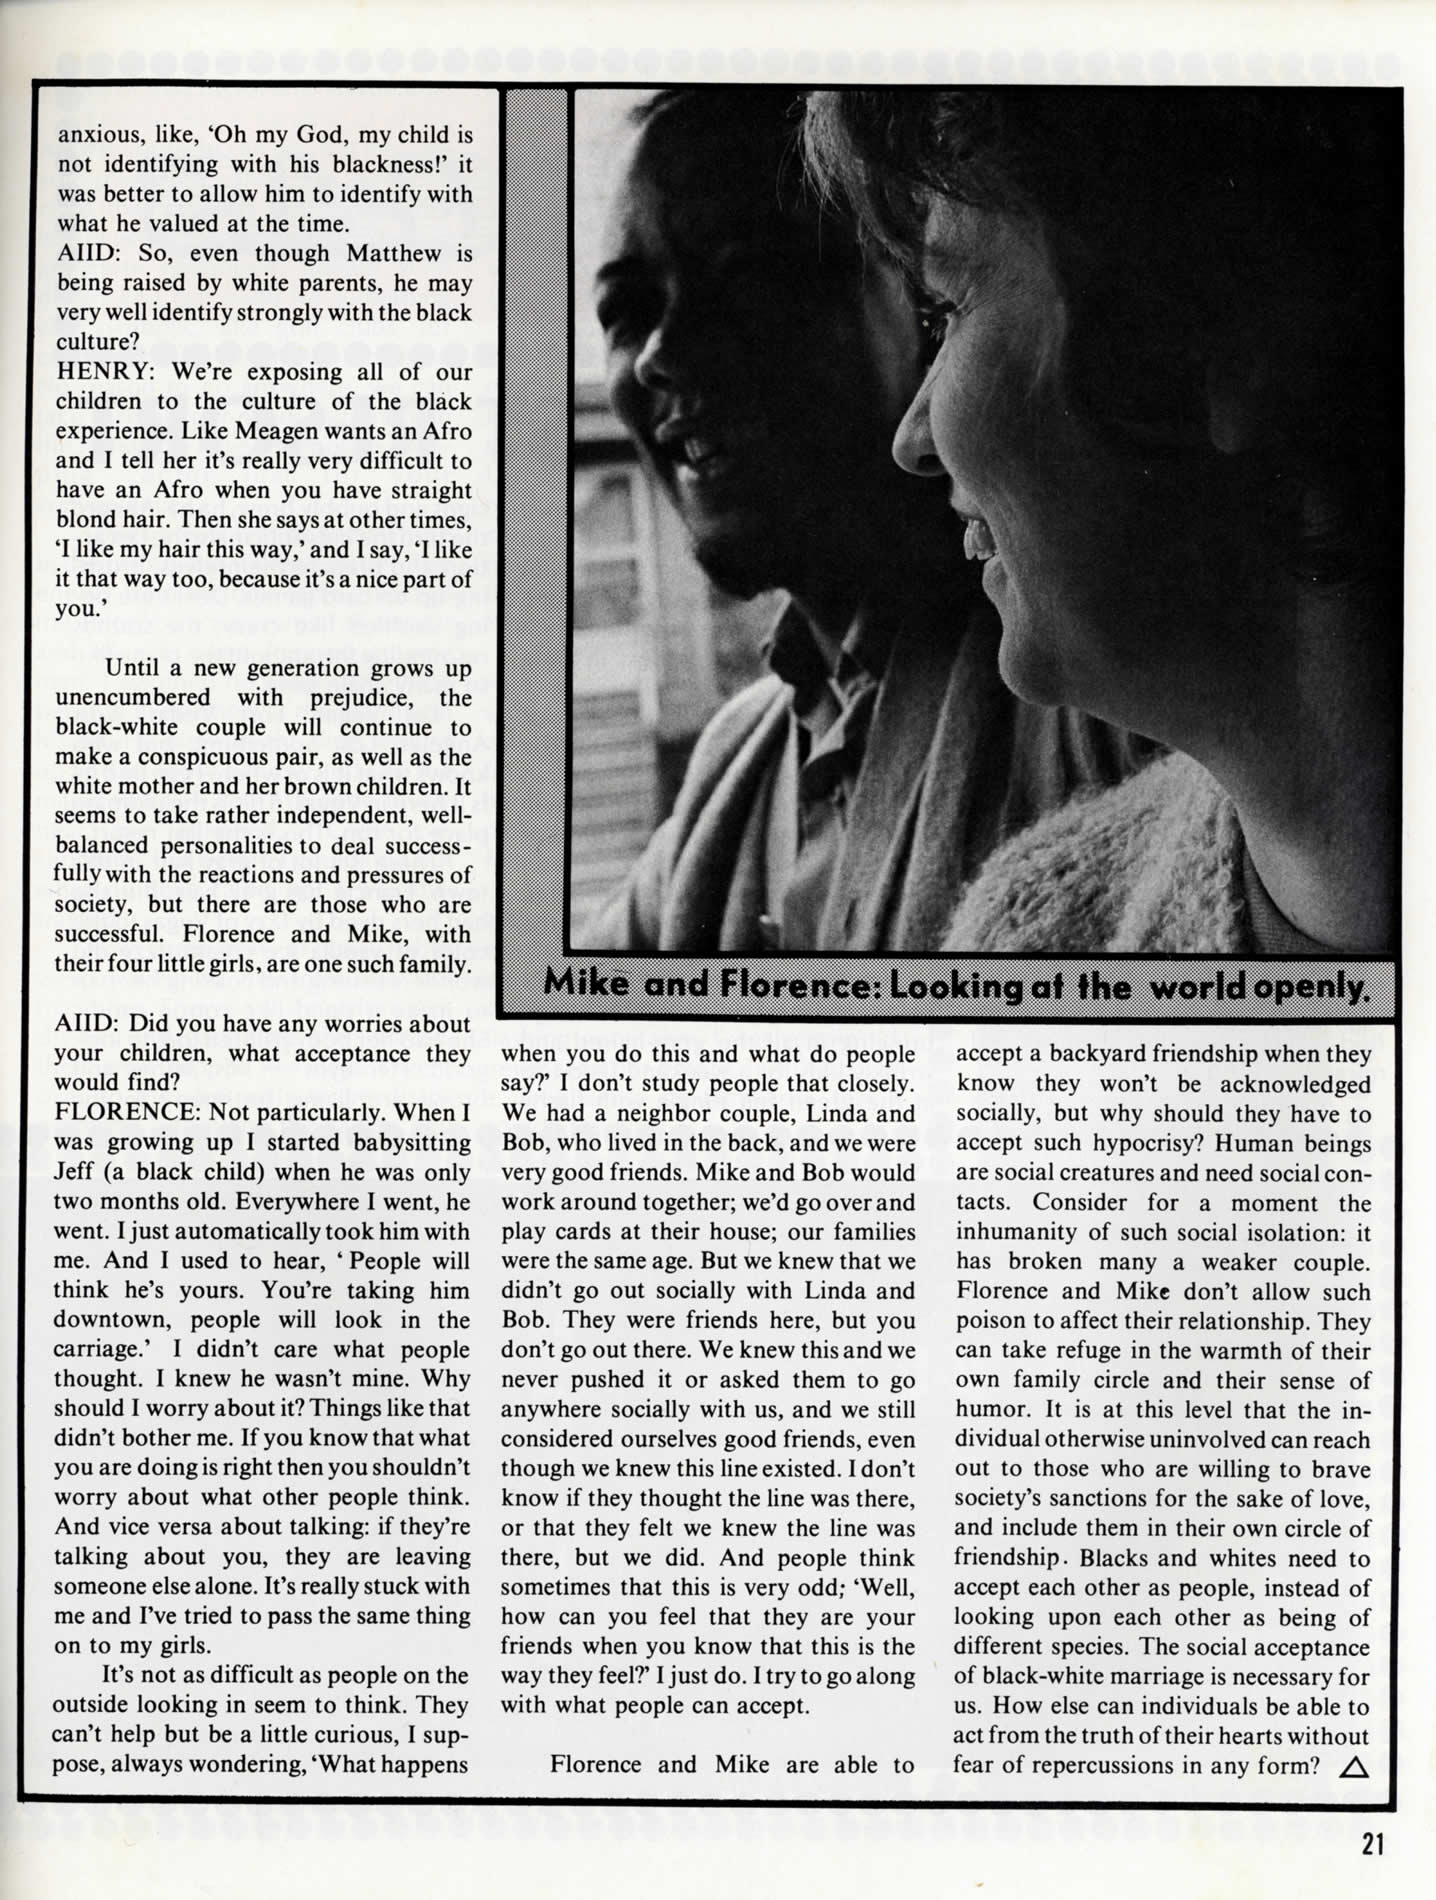 page21_Marriage_article_cont.jpg 384.2K